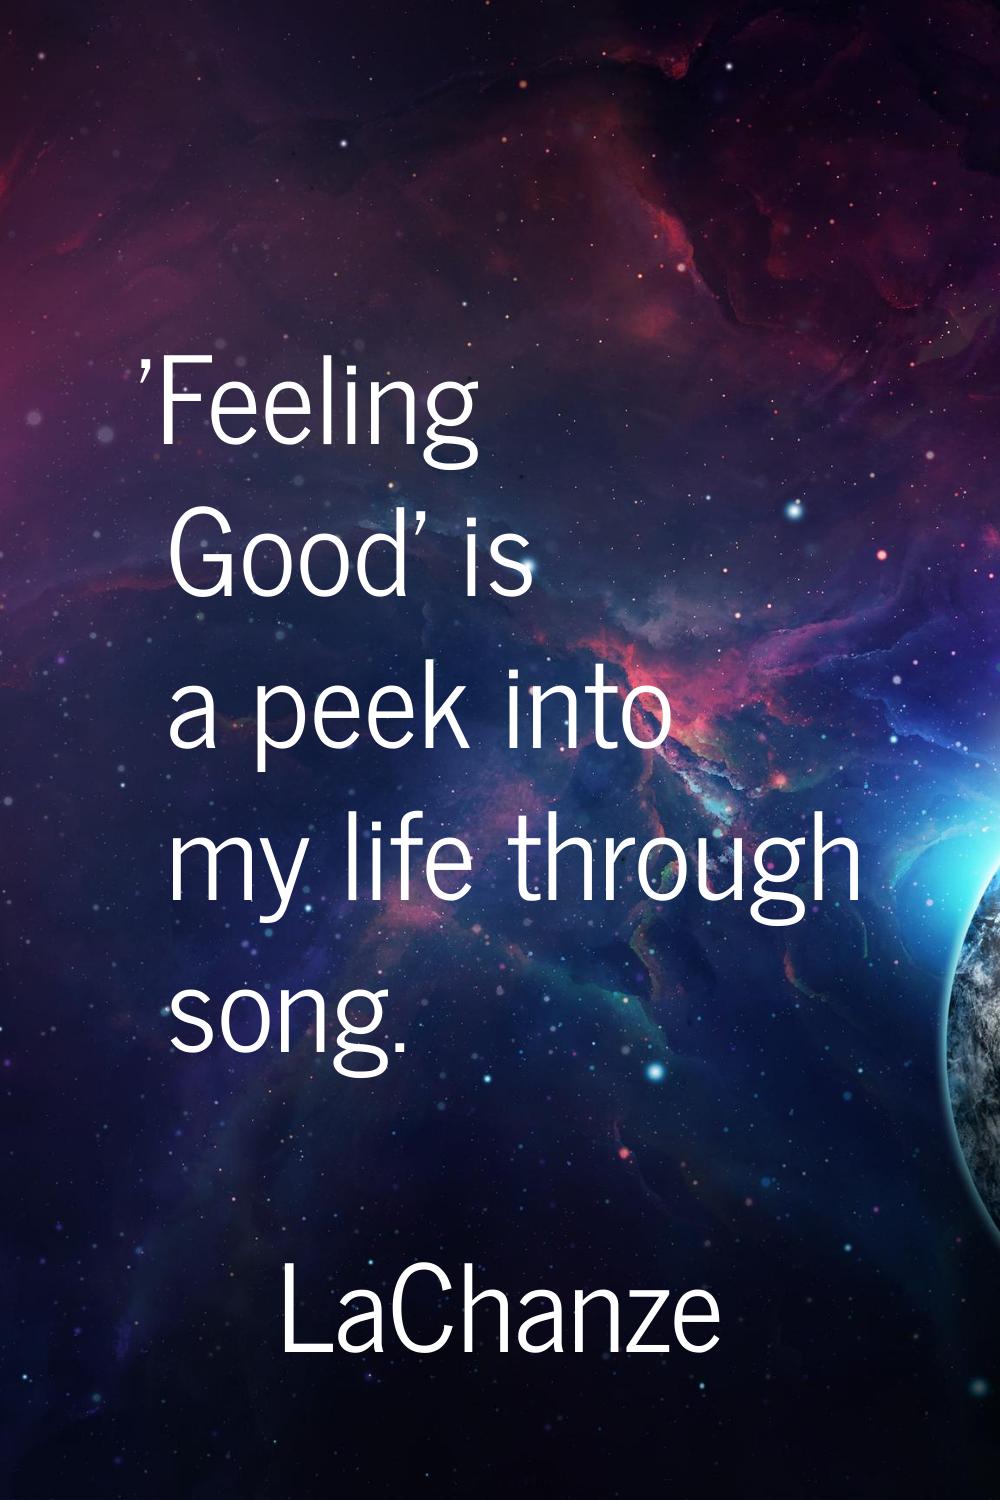 'Feeling Good' is a peek into my life through song.